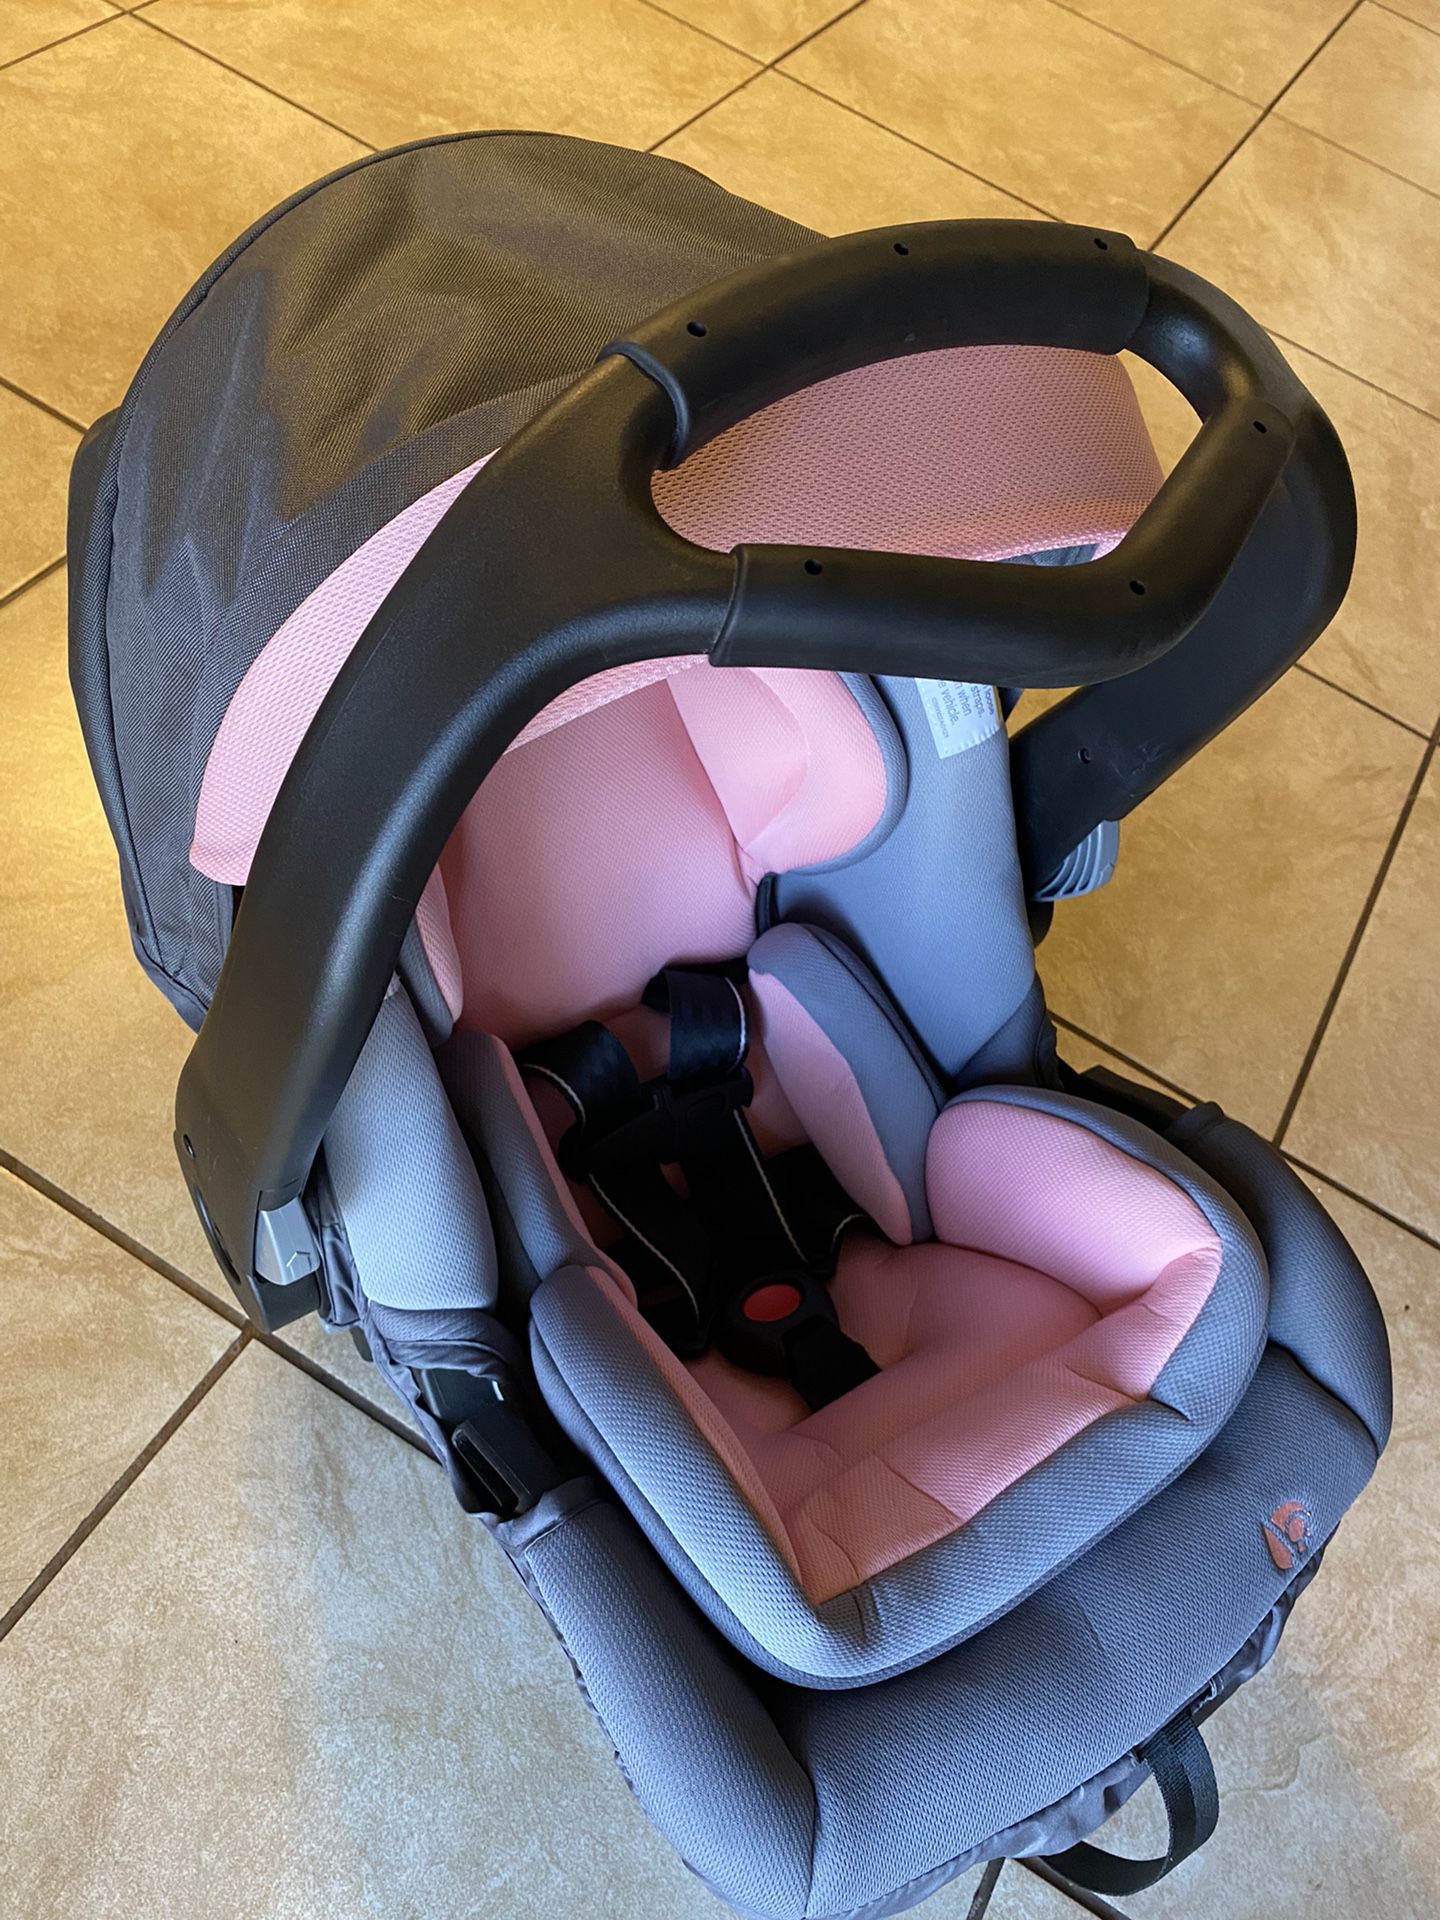 Baby Trend Pink Infant Car Seat 